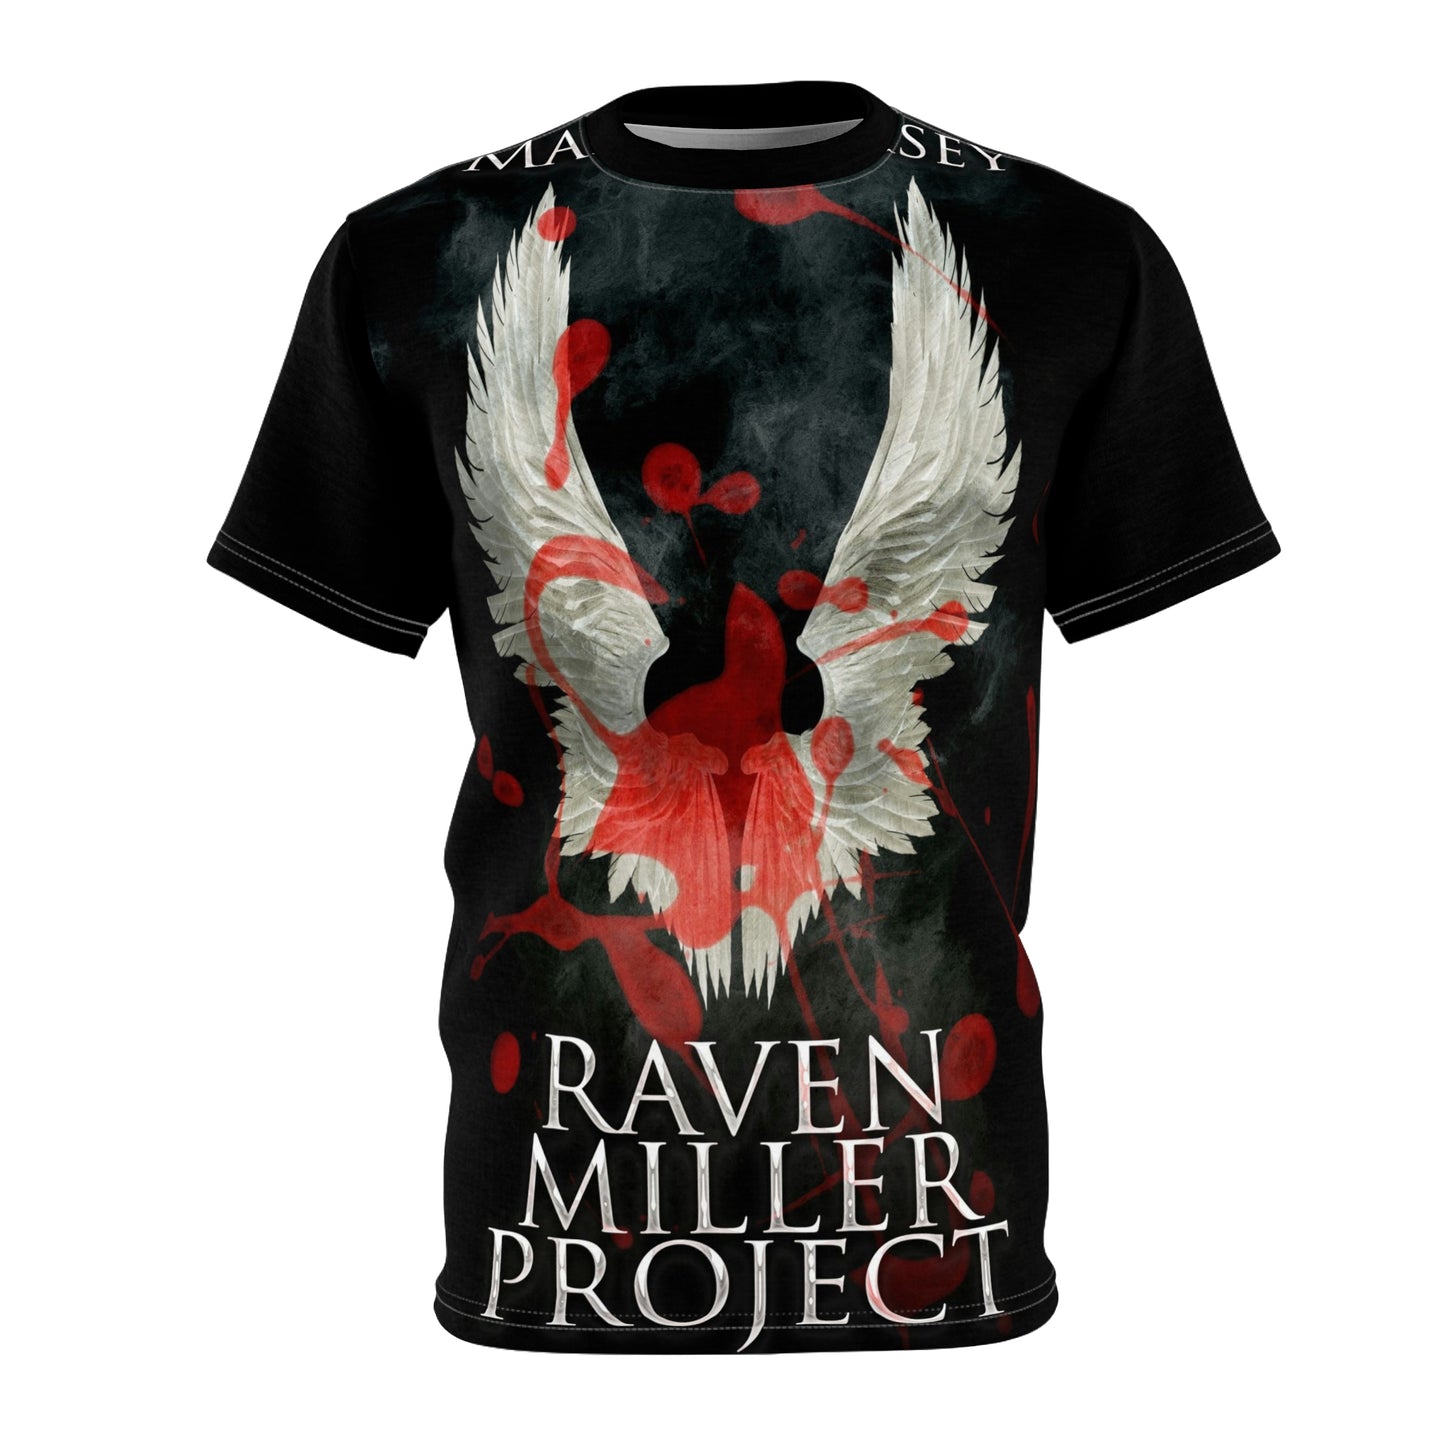 Raven Miller Project - Unisex All-Over Print Cut & Sew T-Shirt